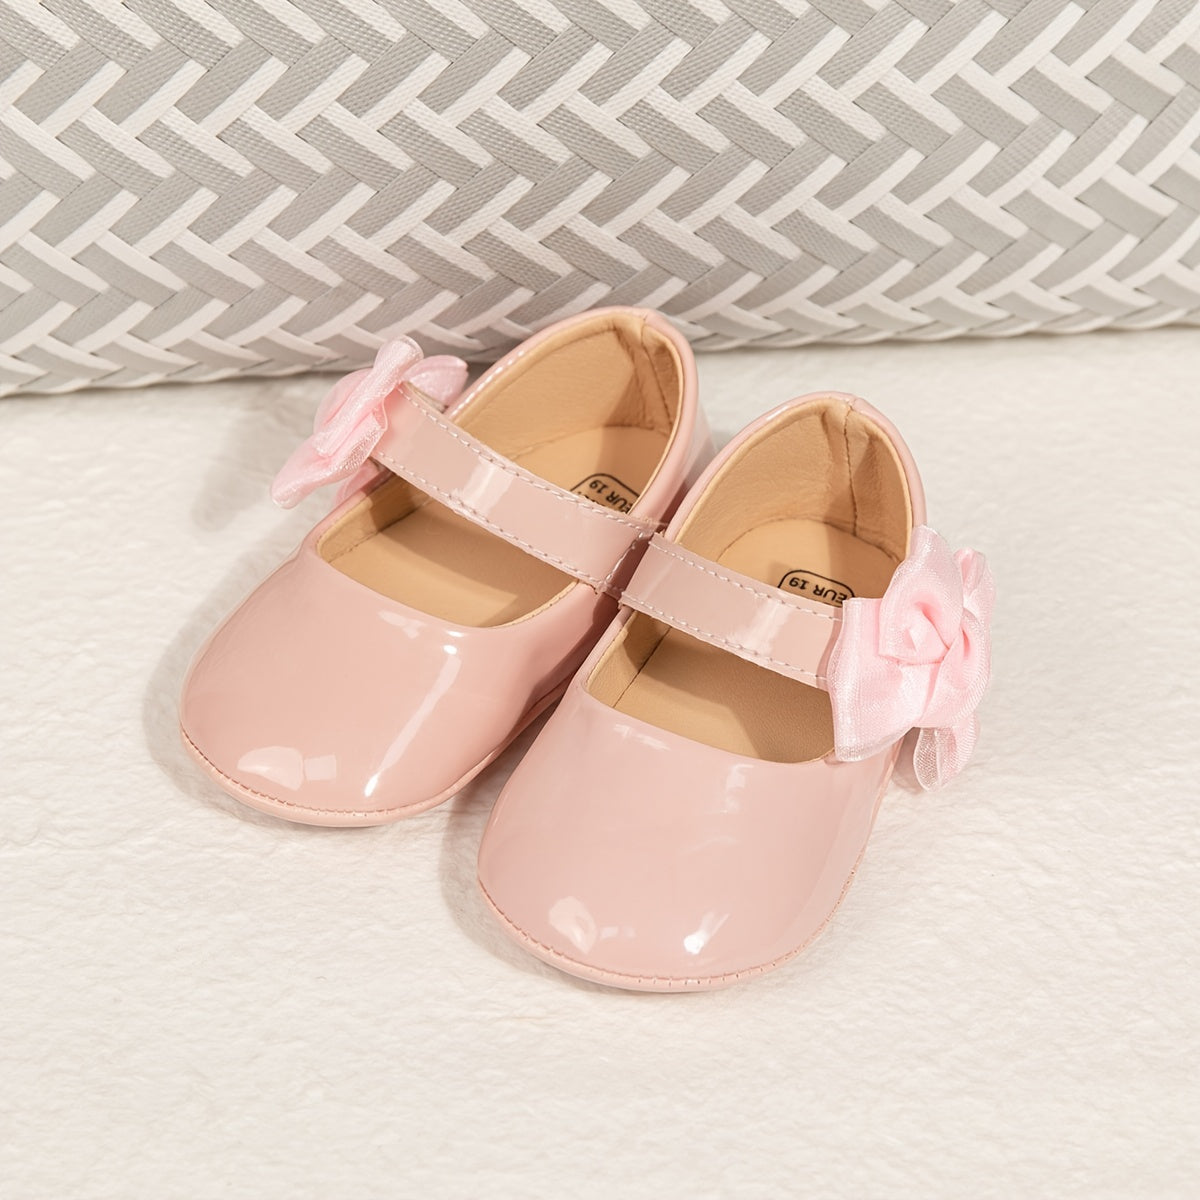 Infant Baby Girls Mary Jane Ballet Flats with Bow Decor